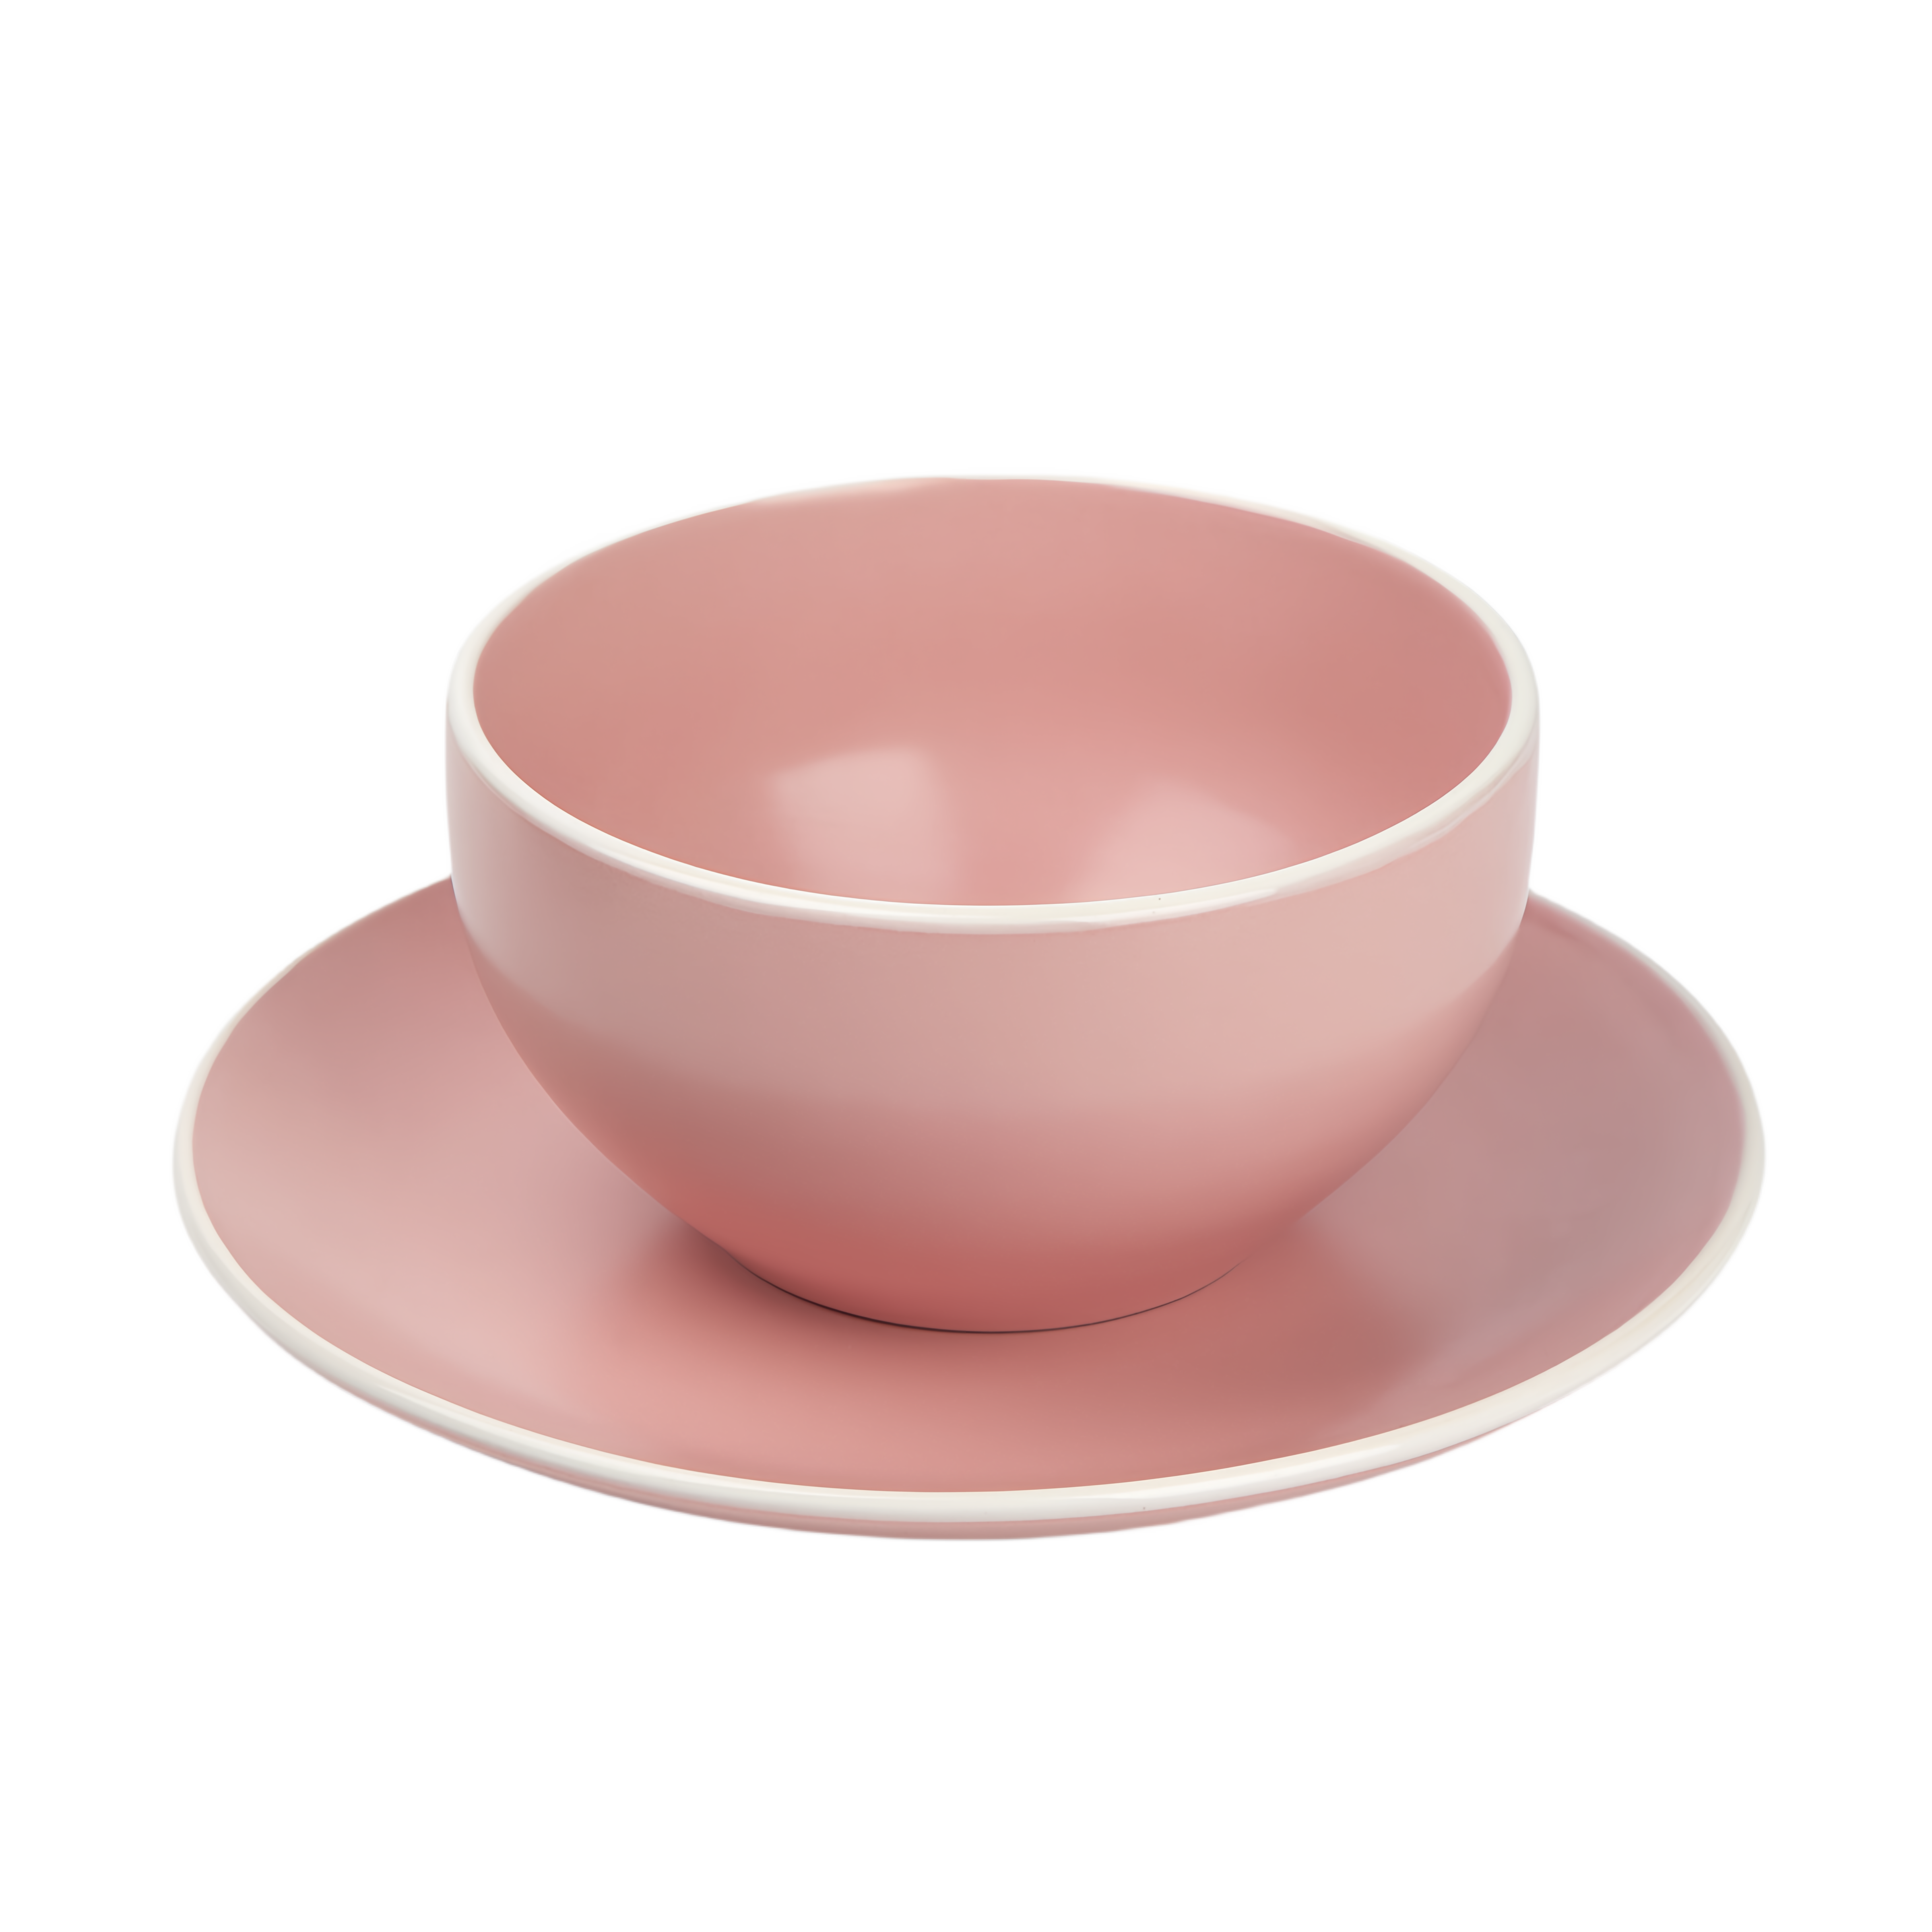 qinge Pink with White Rim Glossy Ceramic Bowl and Plate Set